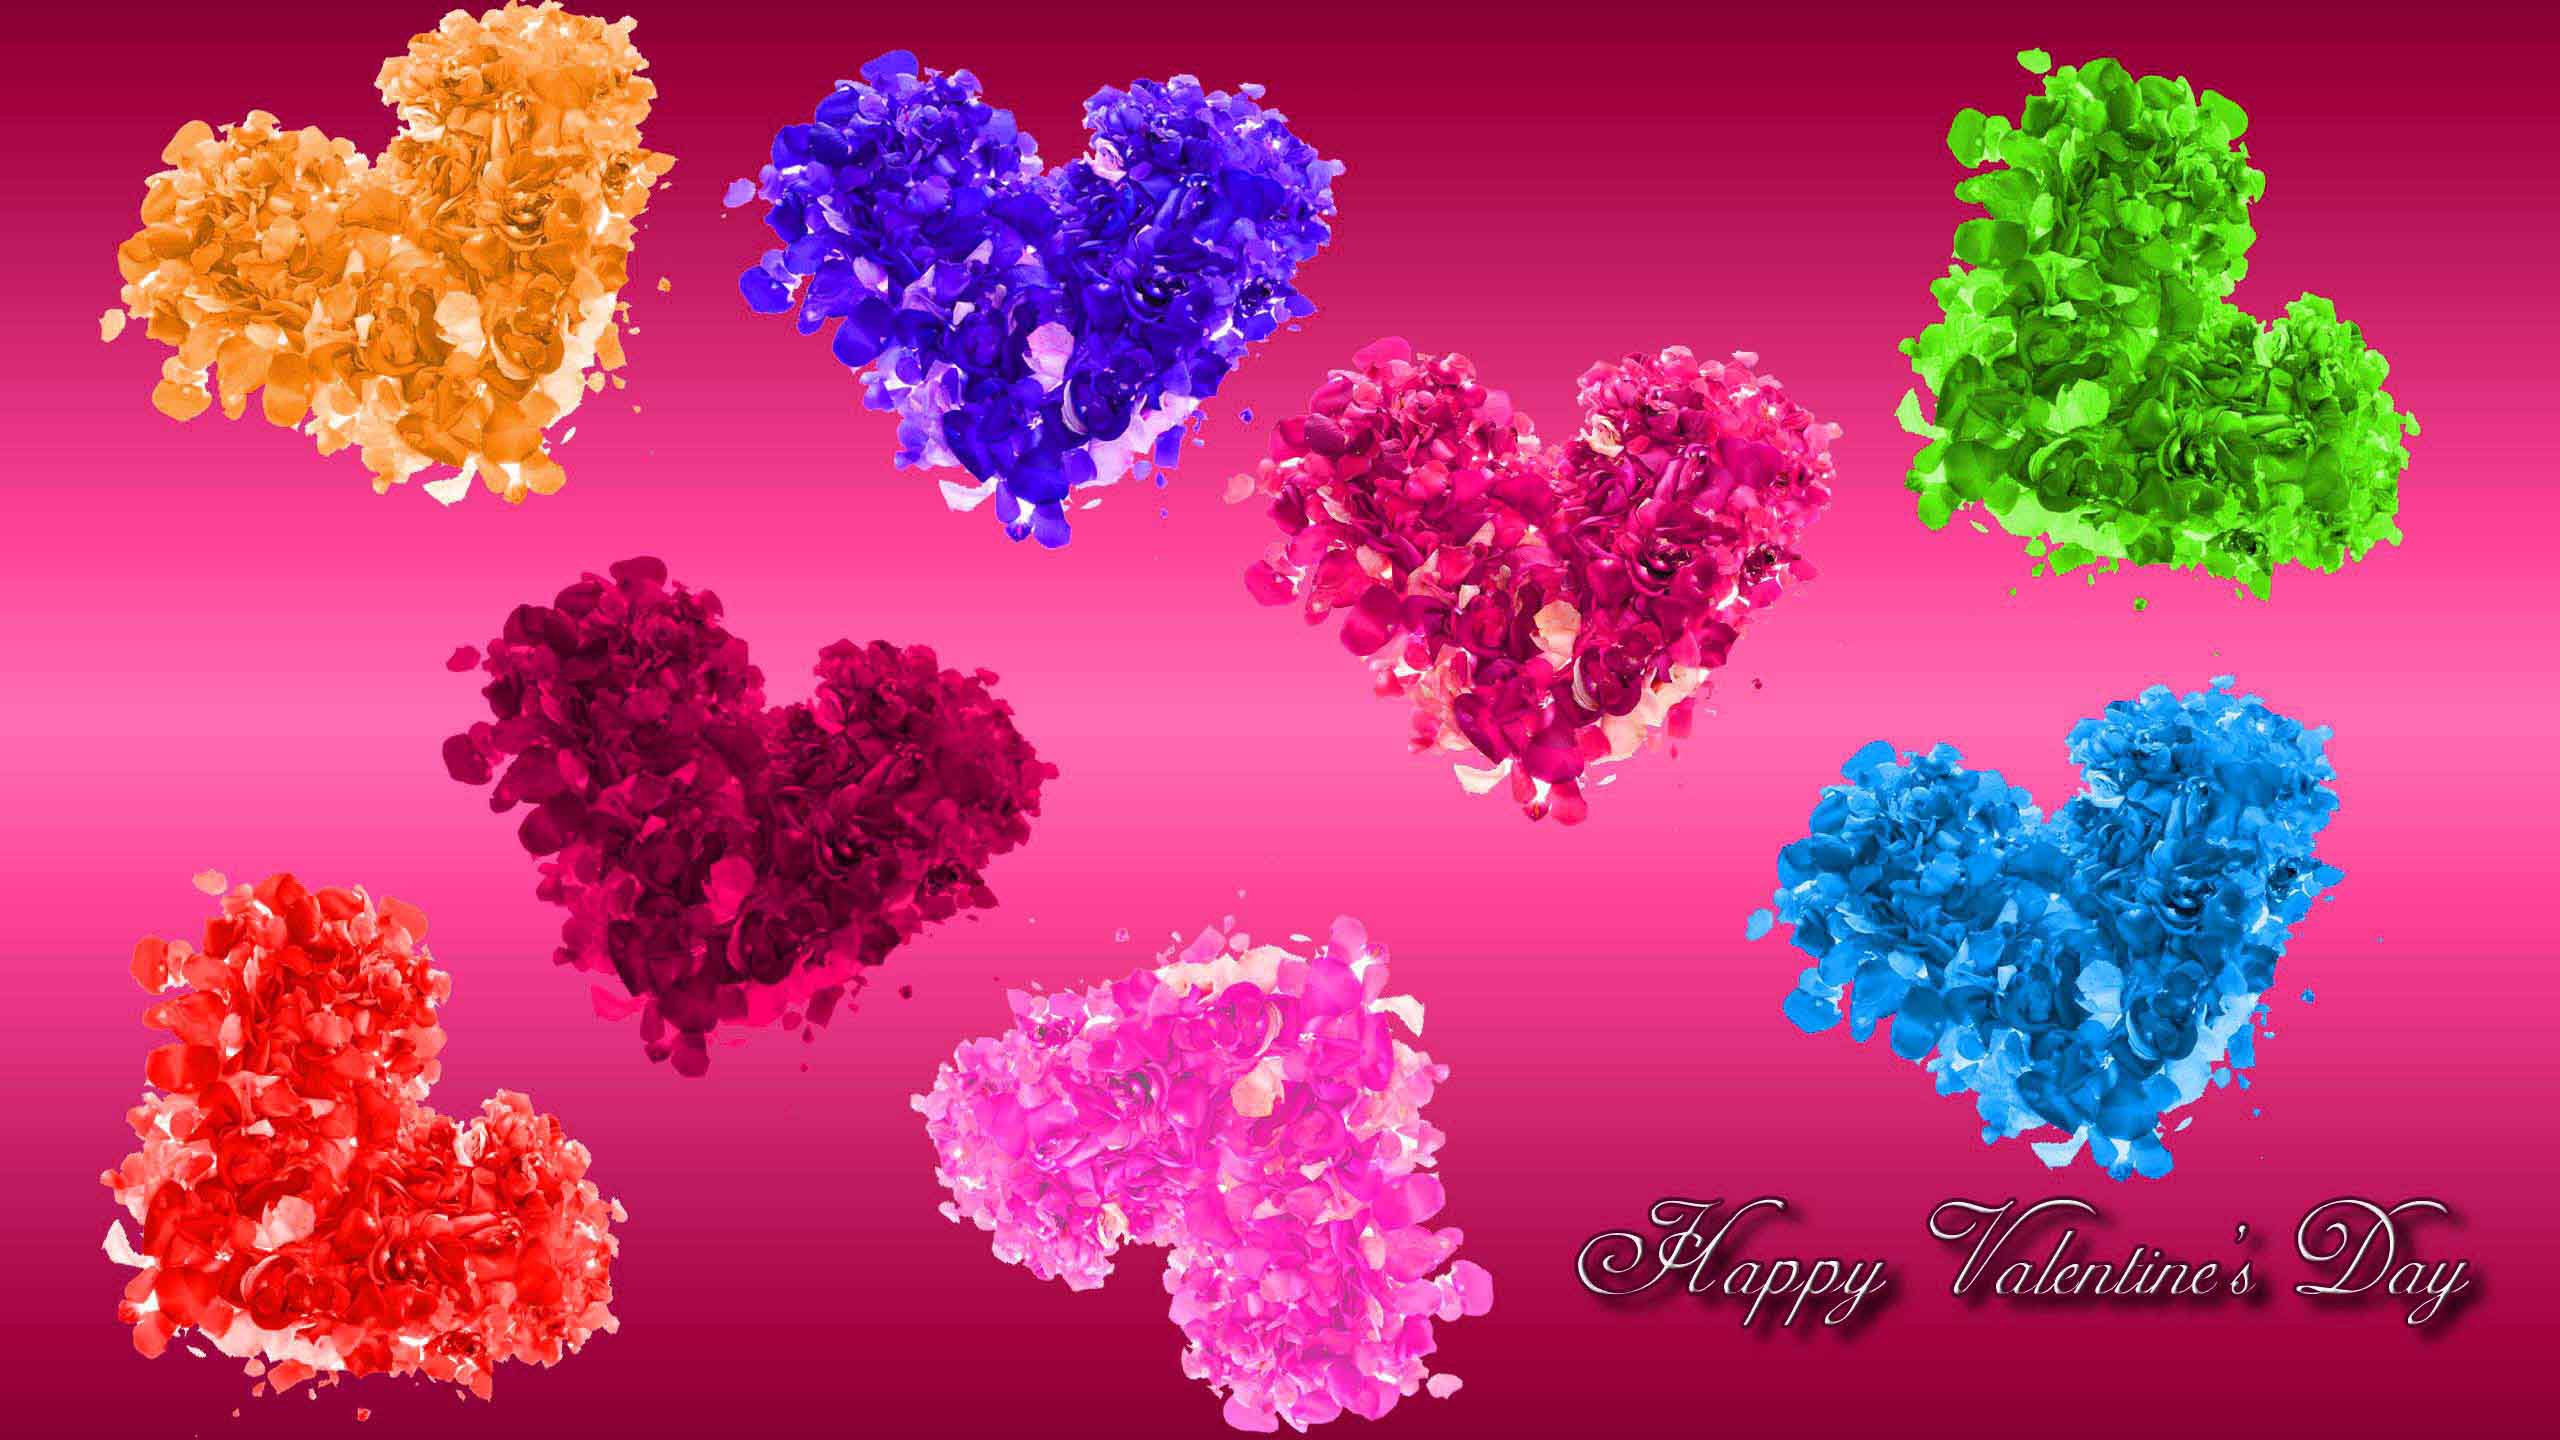 Love Colorful Hearts For Valentines Day Wallpaper